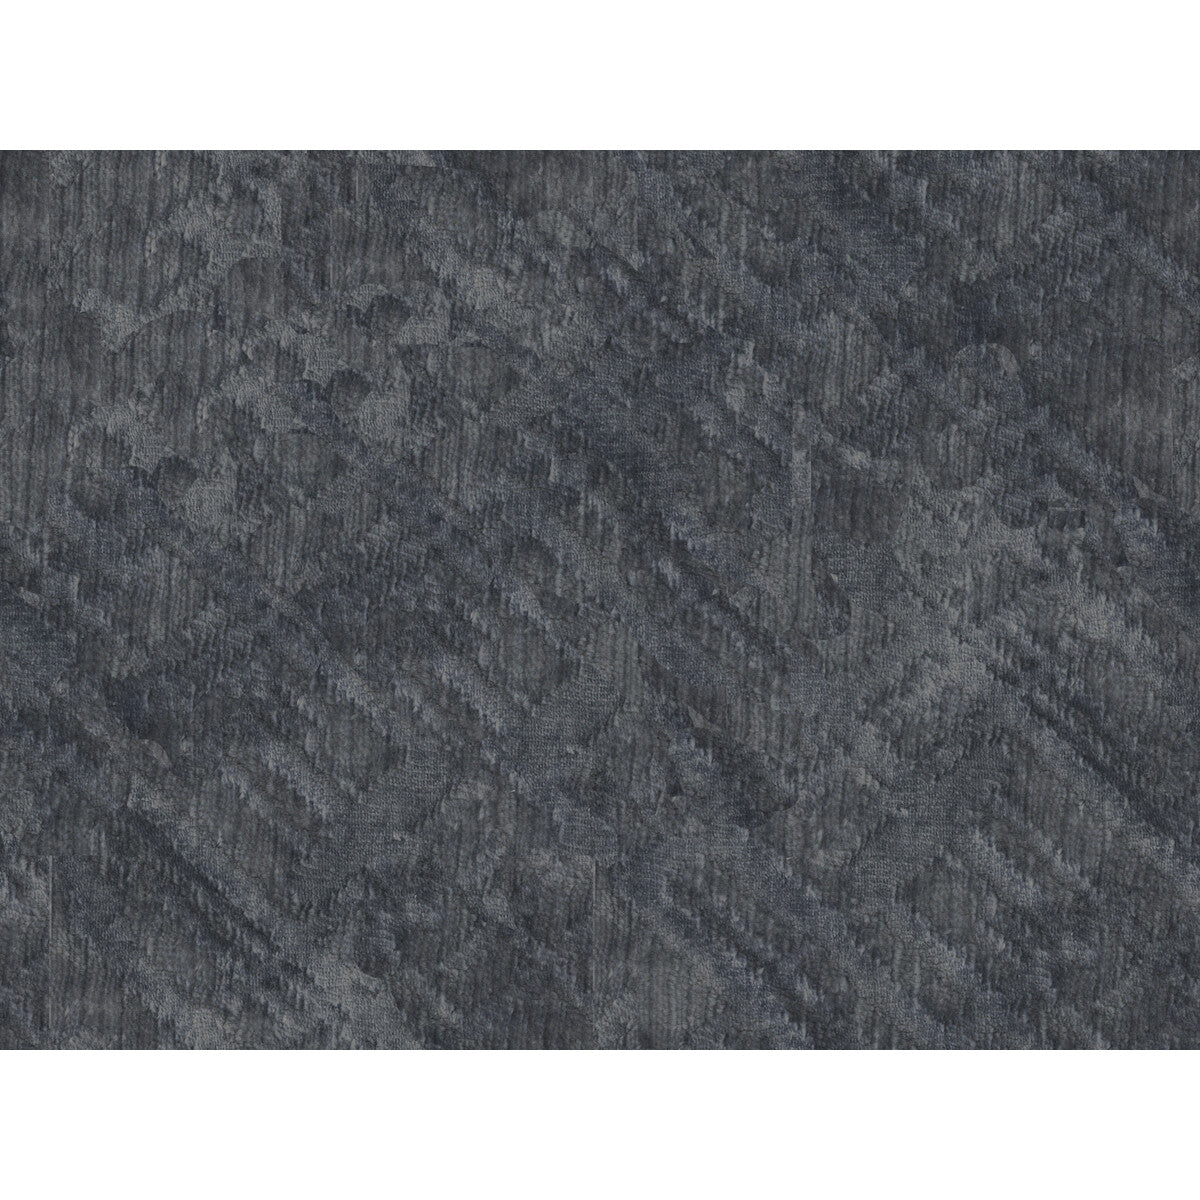 Cross The Line fabric in pewter color - pattern 34333.11.0 - by Kravet Couture